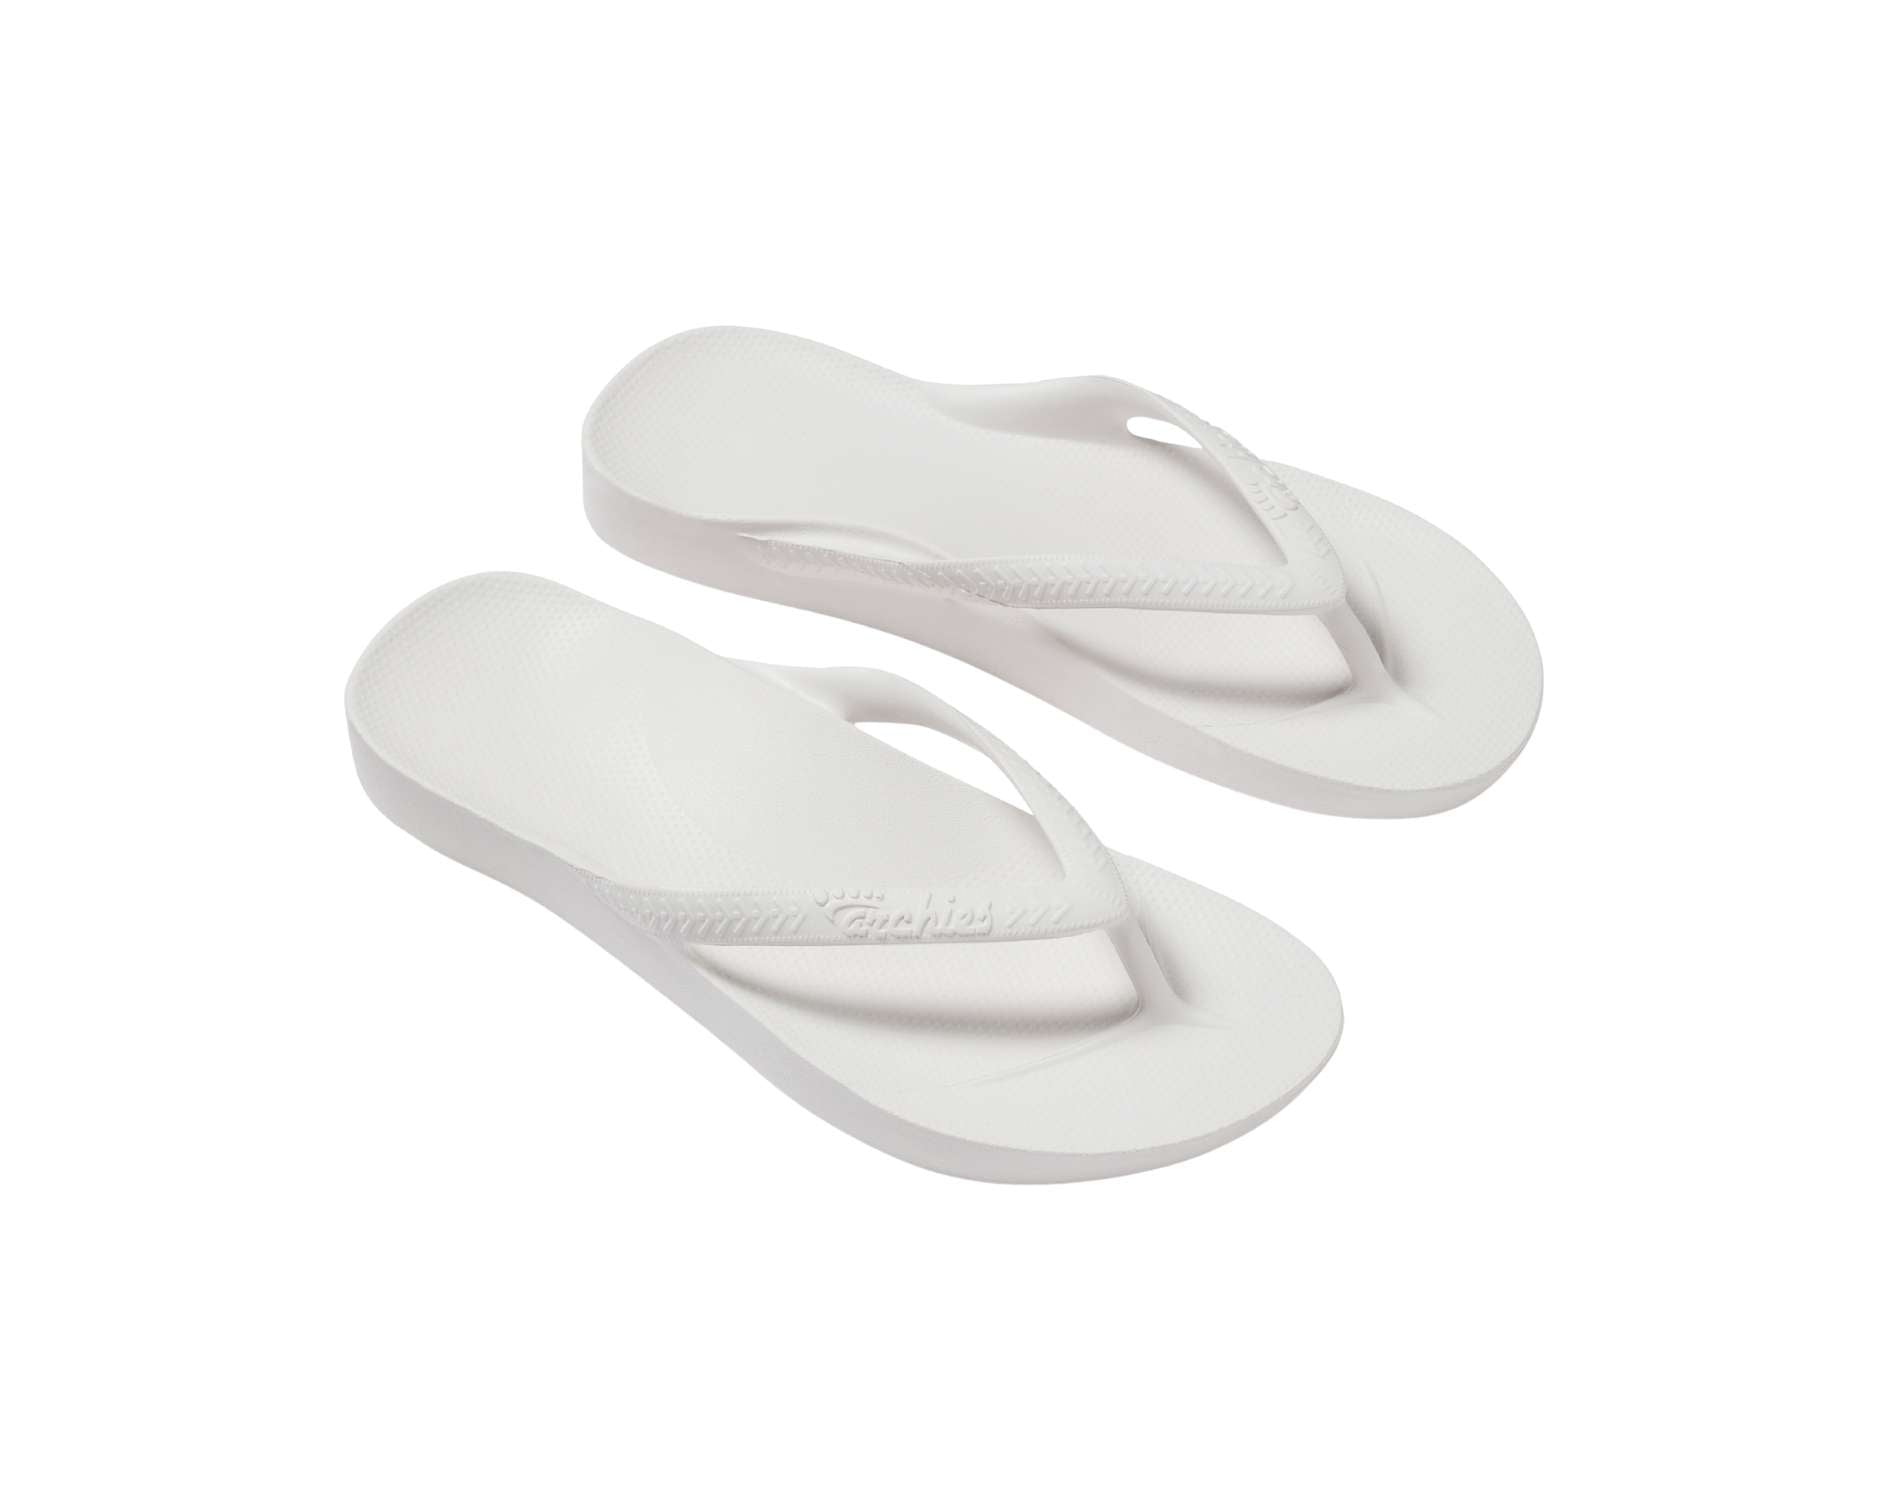 Archies arch support thongs in white colour